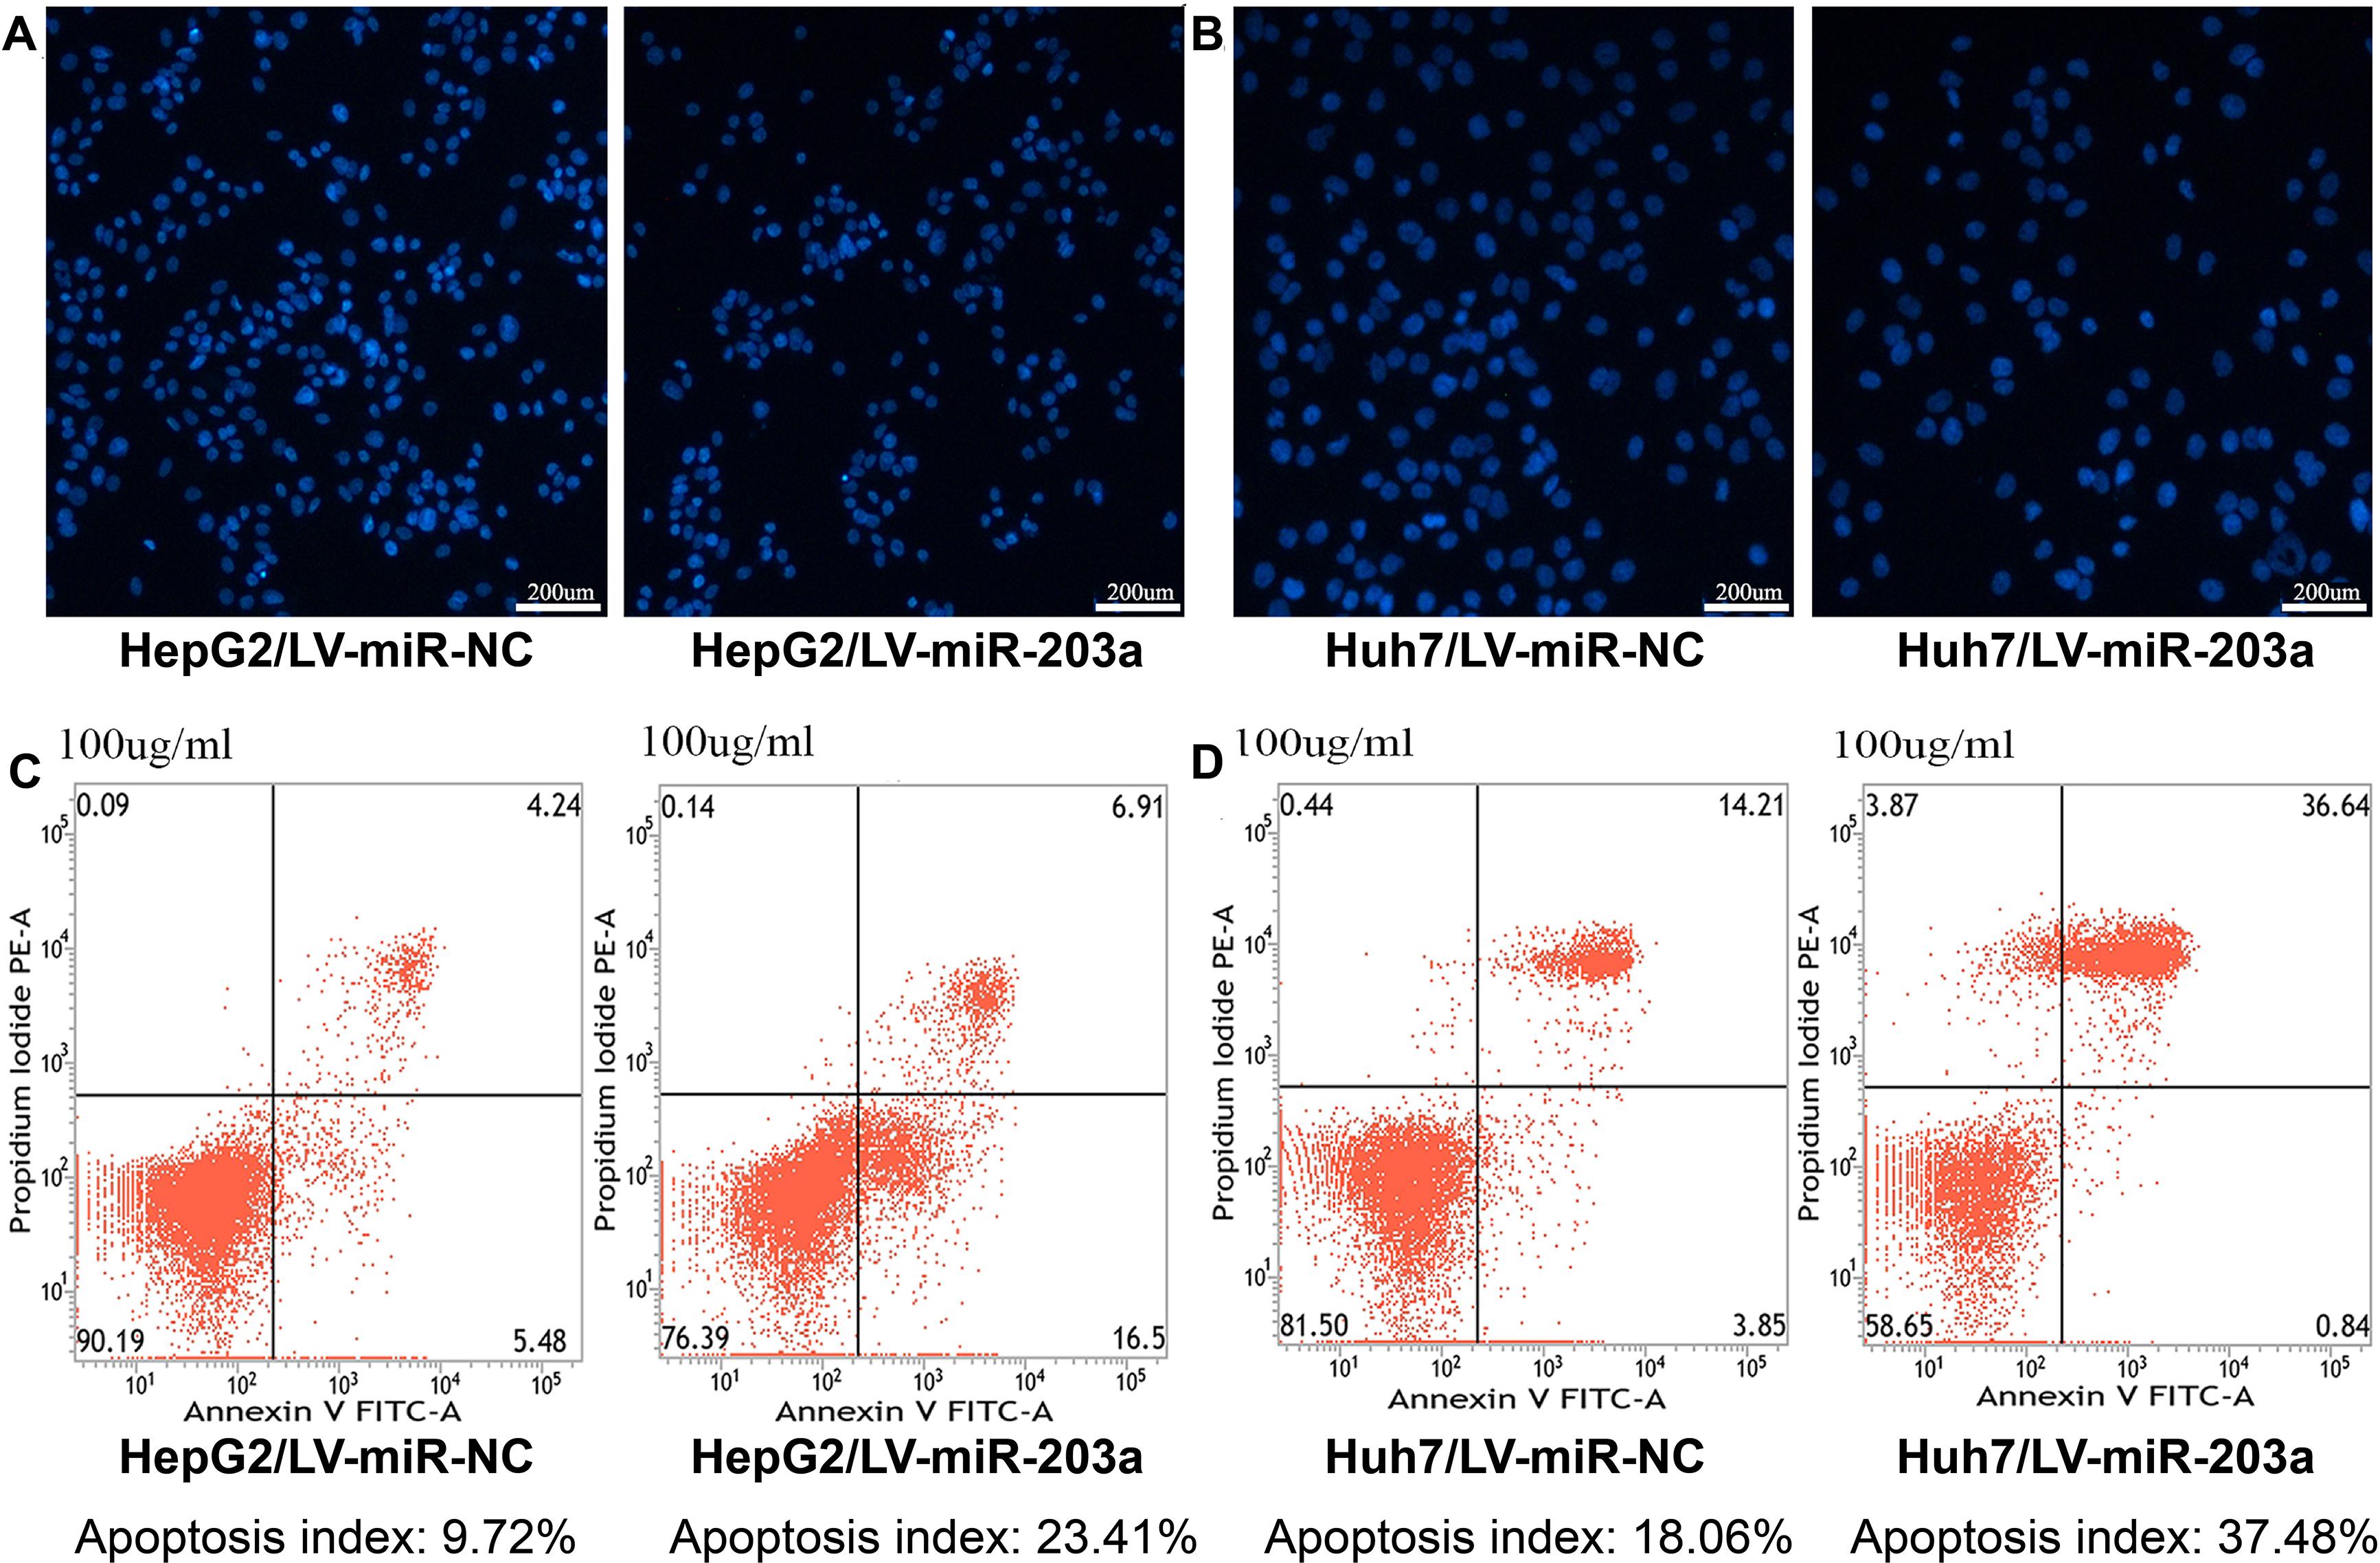 5-FU-induced apoptosis in HCC cells is influenced by miR-203a.